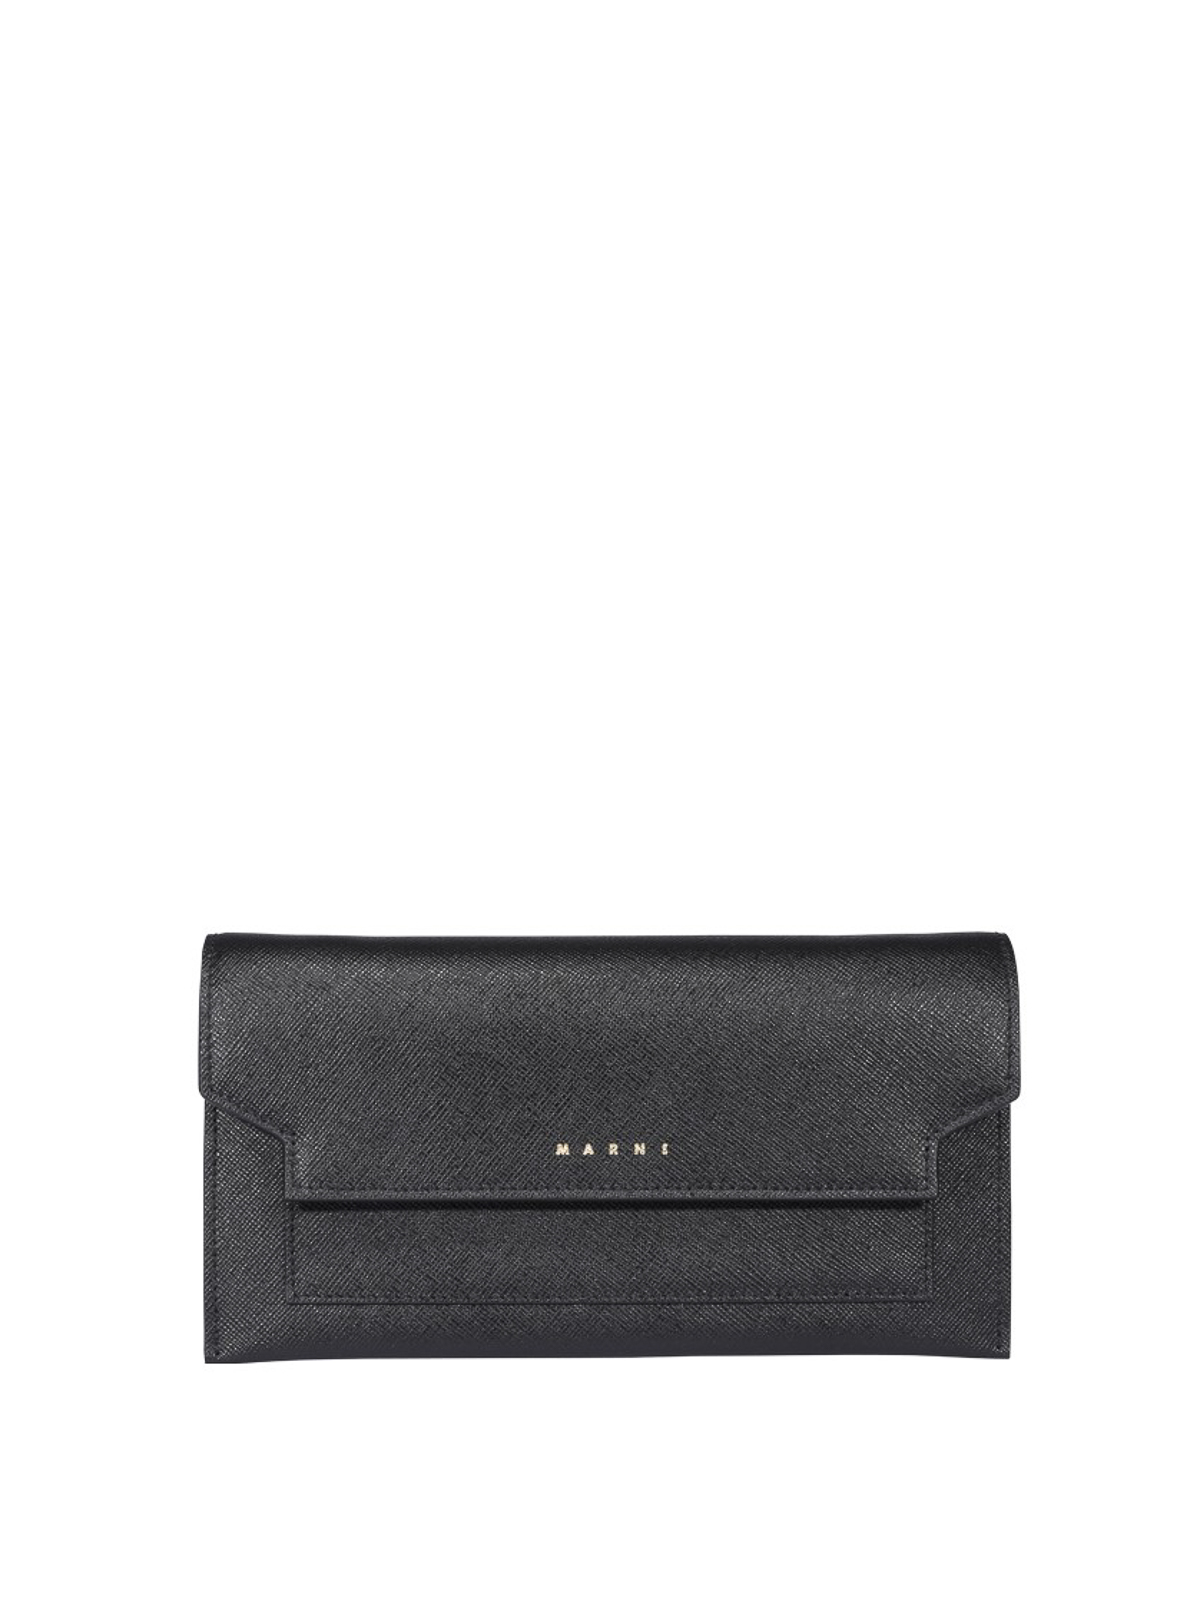 Saffiano and leather wallet with shoulder strap